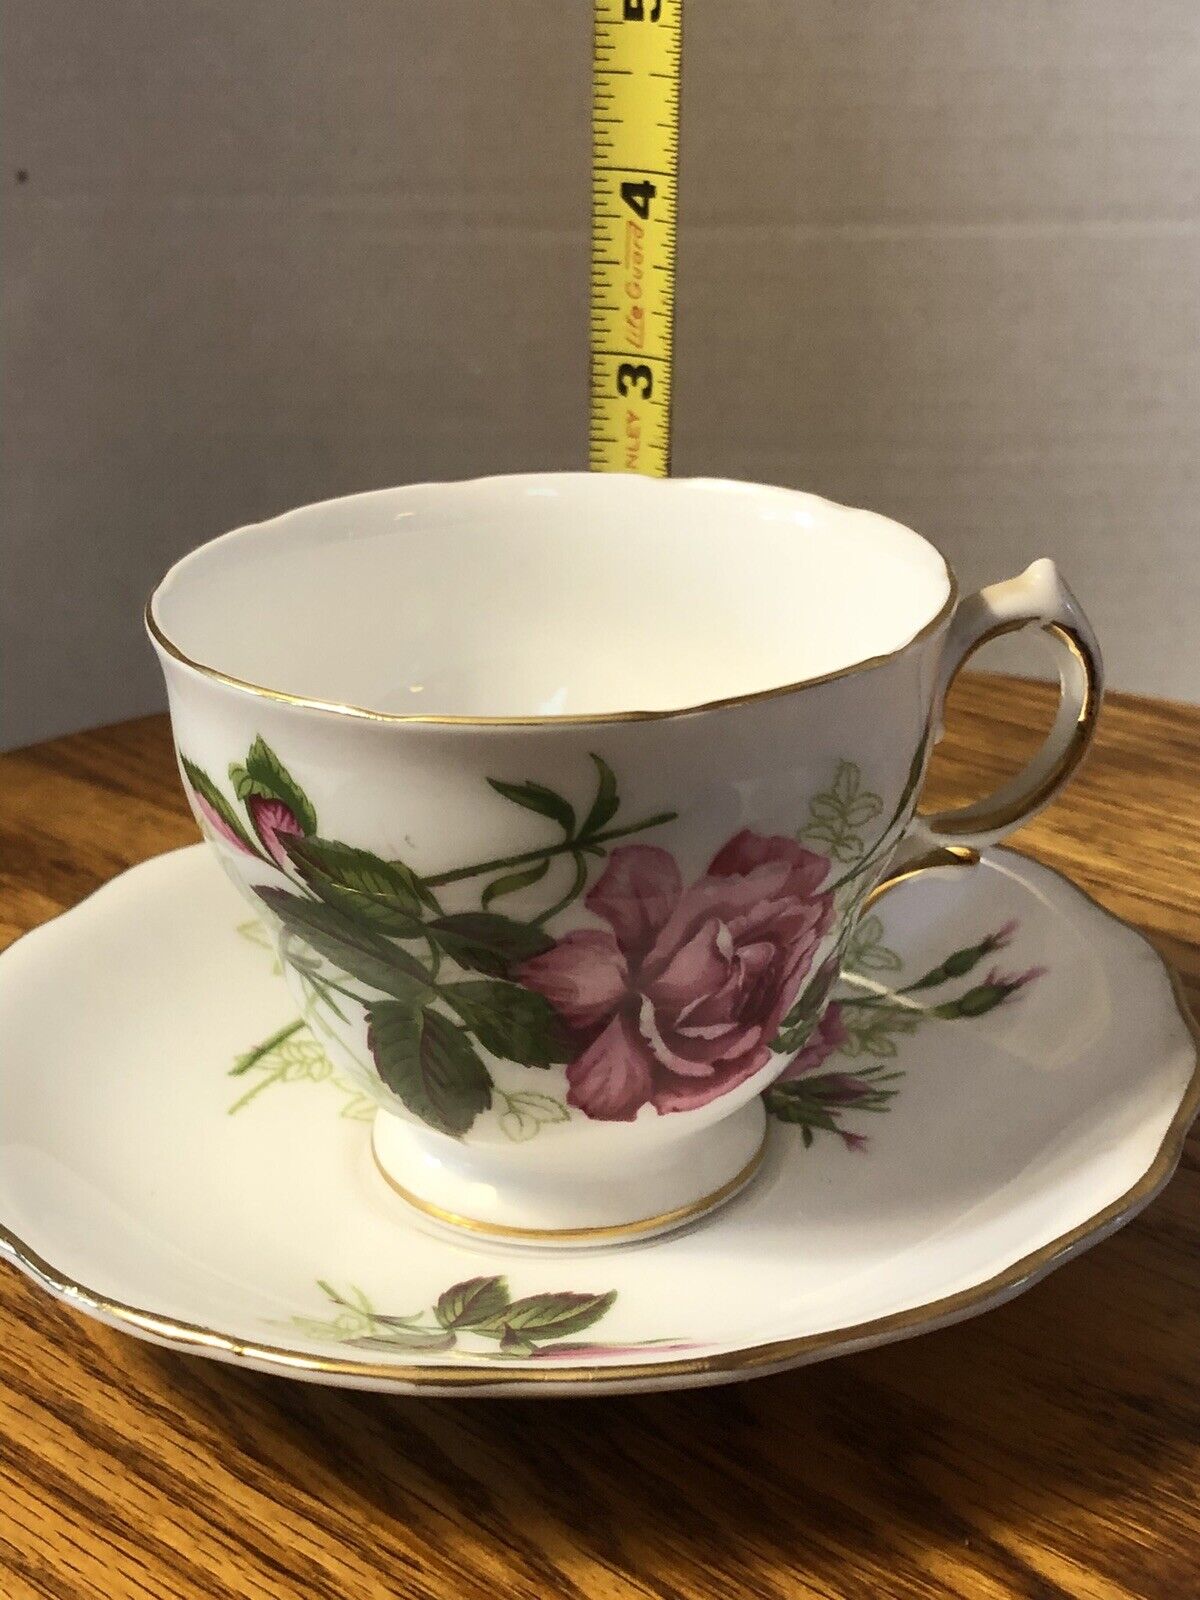 Royal Dale Bone China Vintage Teacup And Saucer. Made In England.